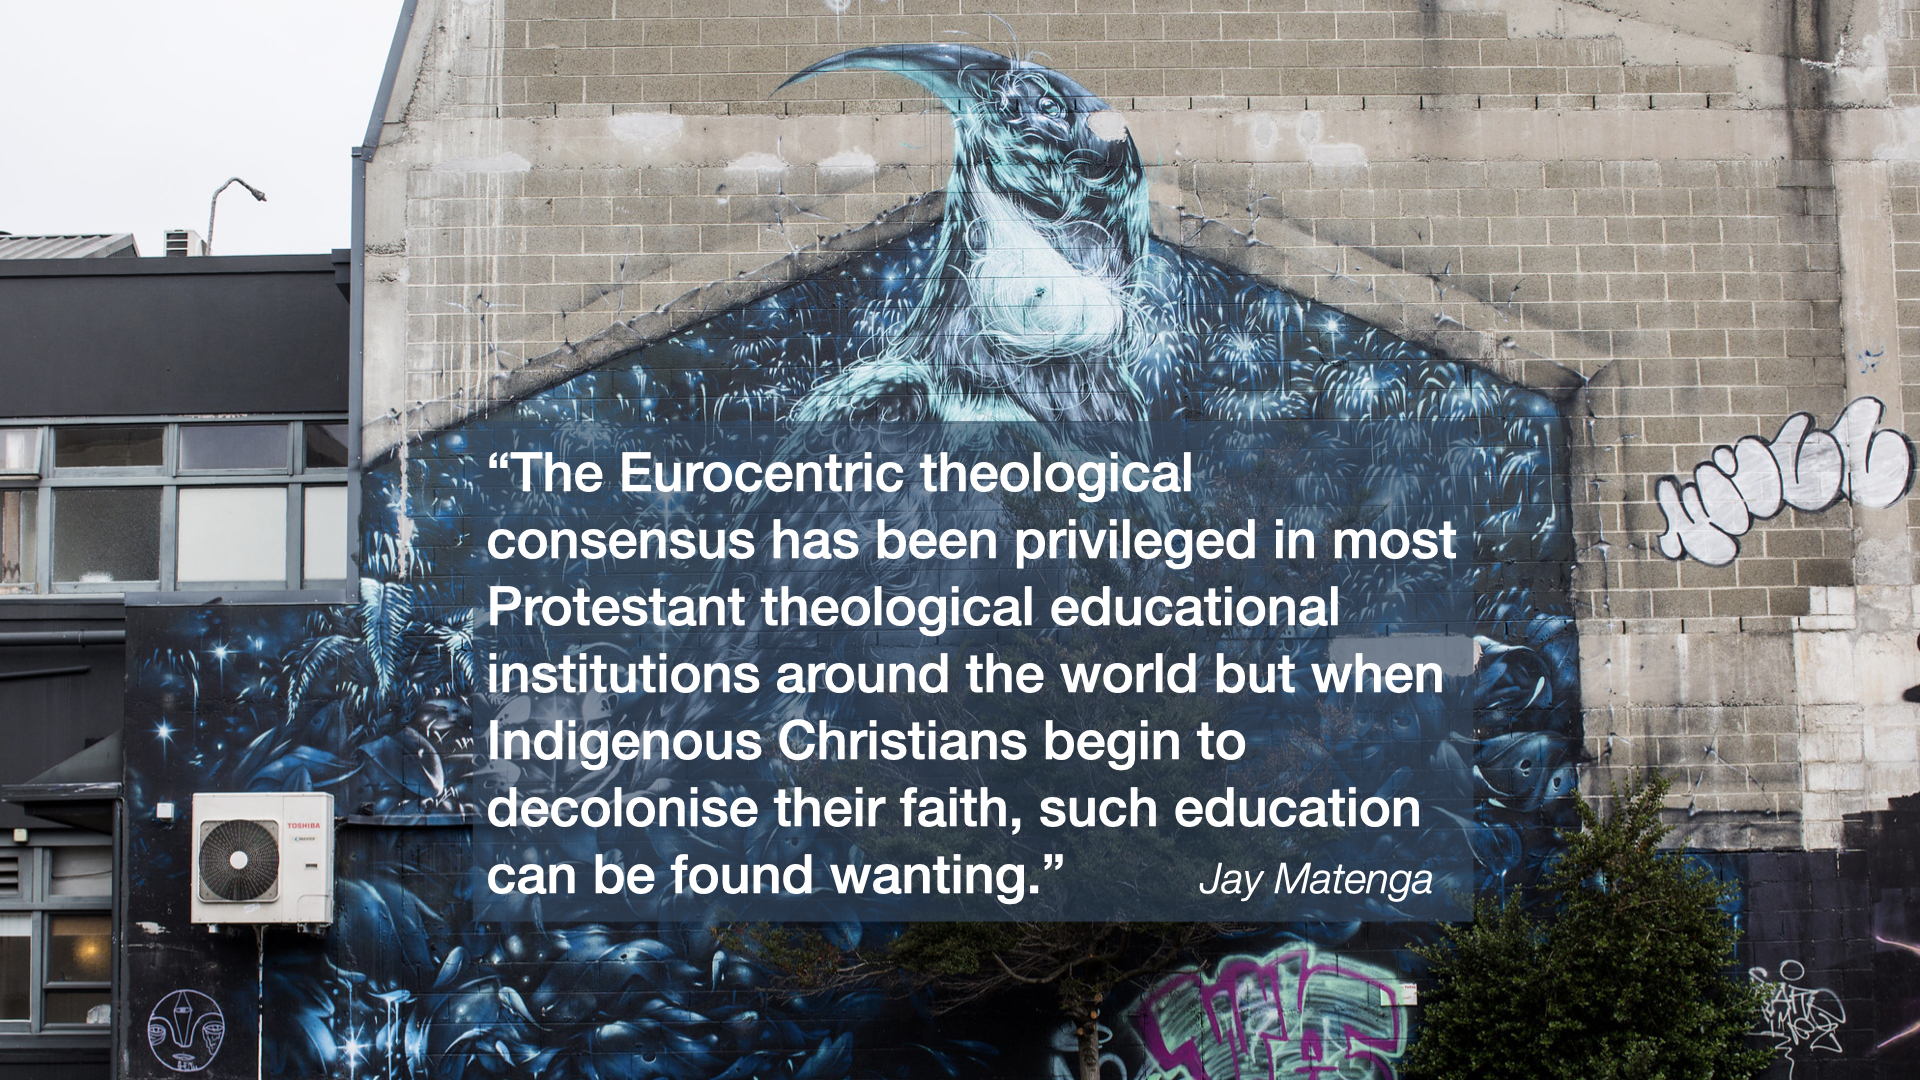 Street art with quote: "The Eurocentric theological consensus has been privileged in most Protestant theological educational institutions around the world but when Indigenous Christians begin to decolonise their faith, such education can be found wanting." - Jay Matenga